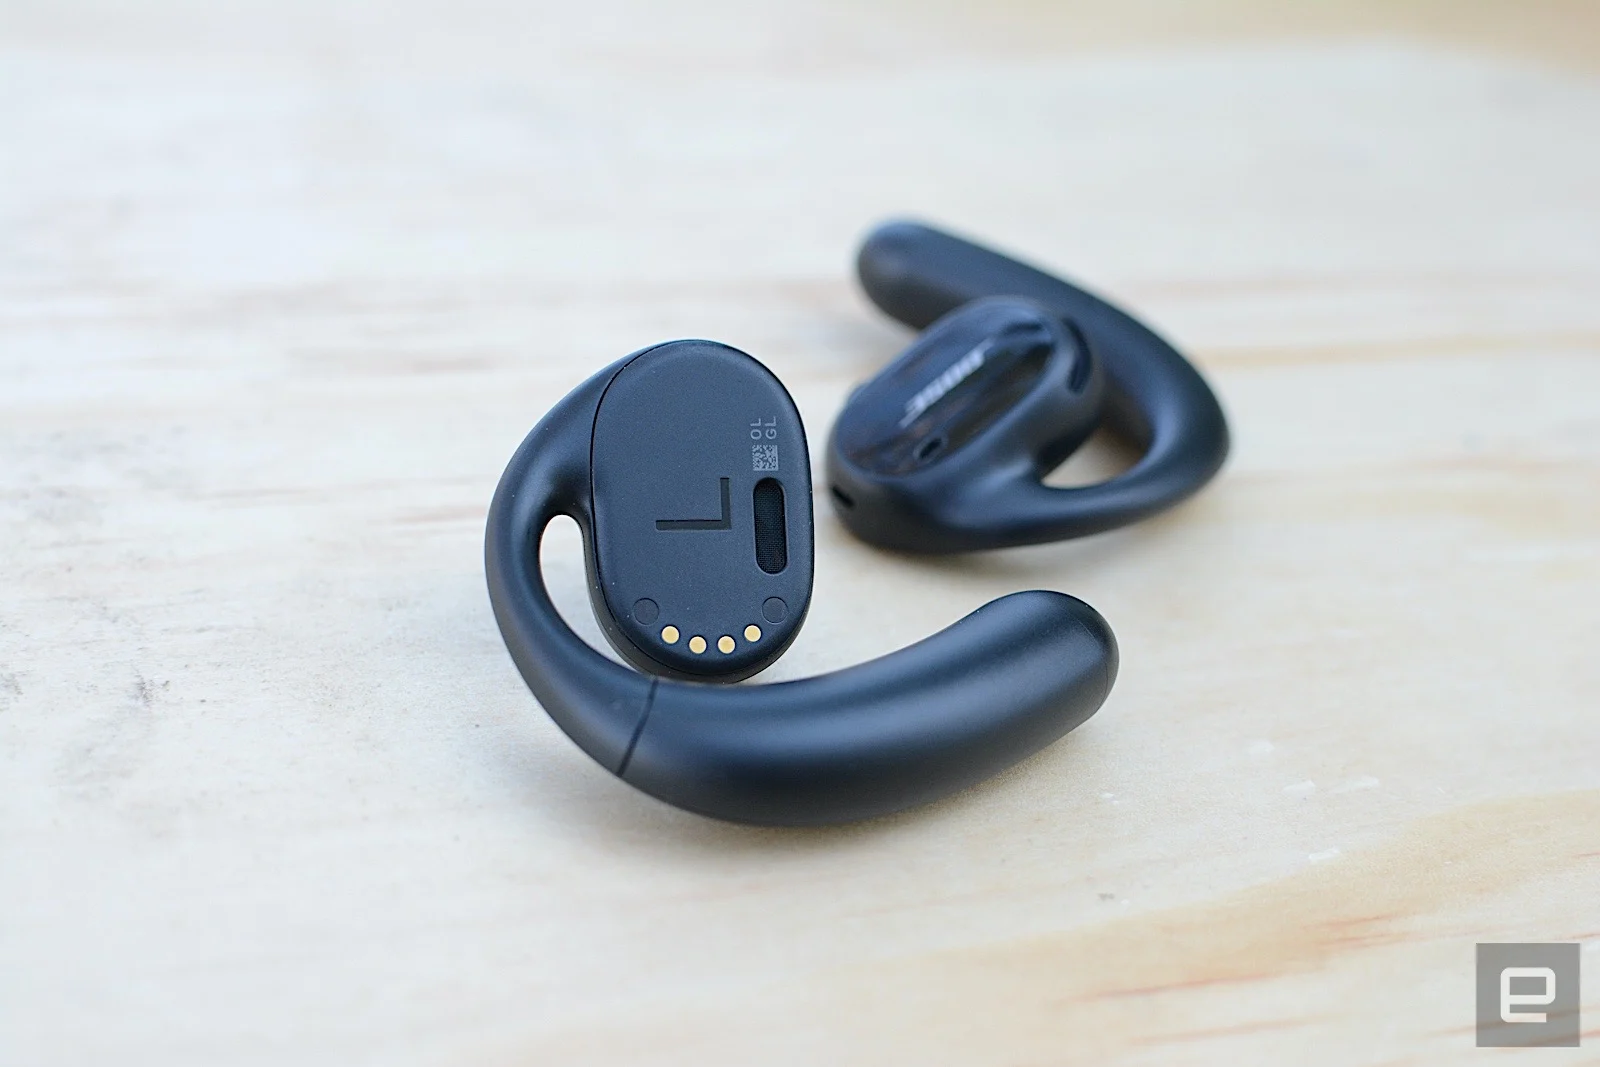 Bose definitely achieves what it set out to do with its latest true wireless earbuds. The company keeps your ears open to your environment while you exercise, which can increase safety for runners and other workout situations. At home, you won’t seem like a jerk for not answering your partner while listening to a podcast. However, the design that makes the Sport Open Earbuds compelling for workouts limits performance elsewhere, so you have to accept sacrifices that could be deal breakers. 